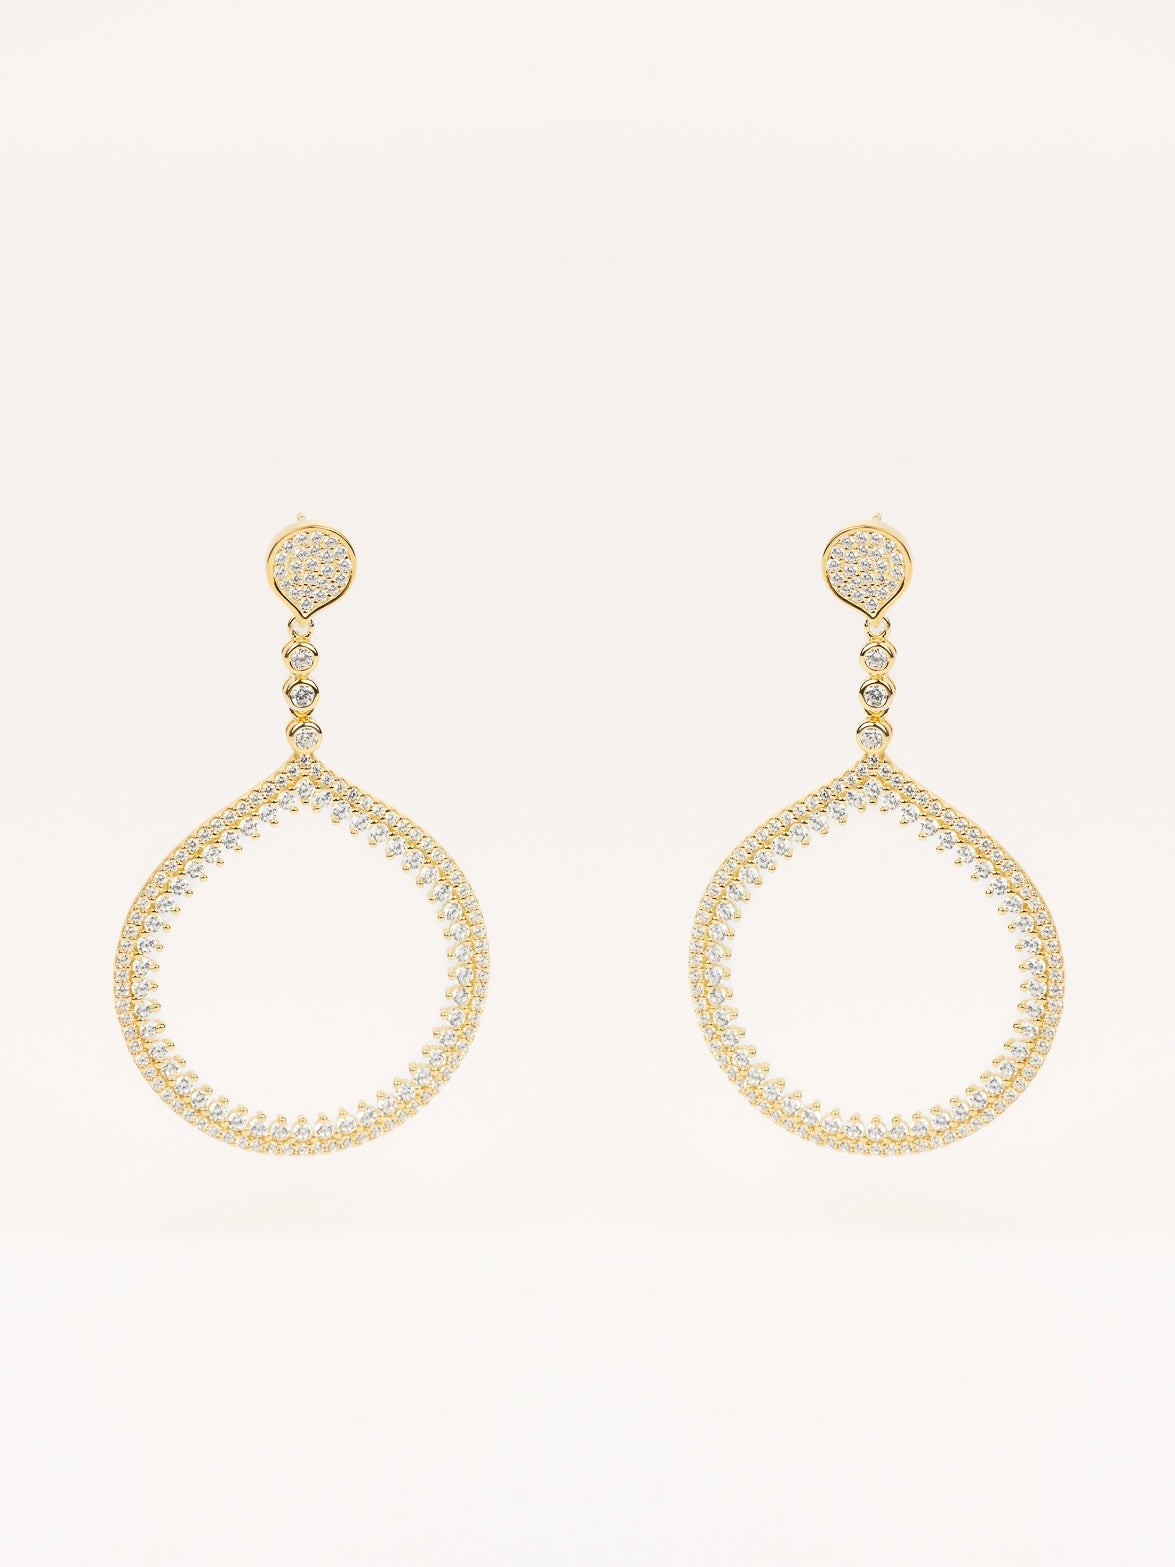 FLORENCE GOLD-PLATED EARRINGS